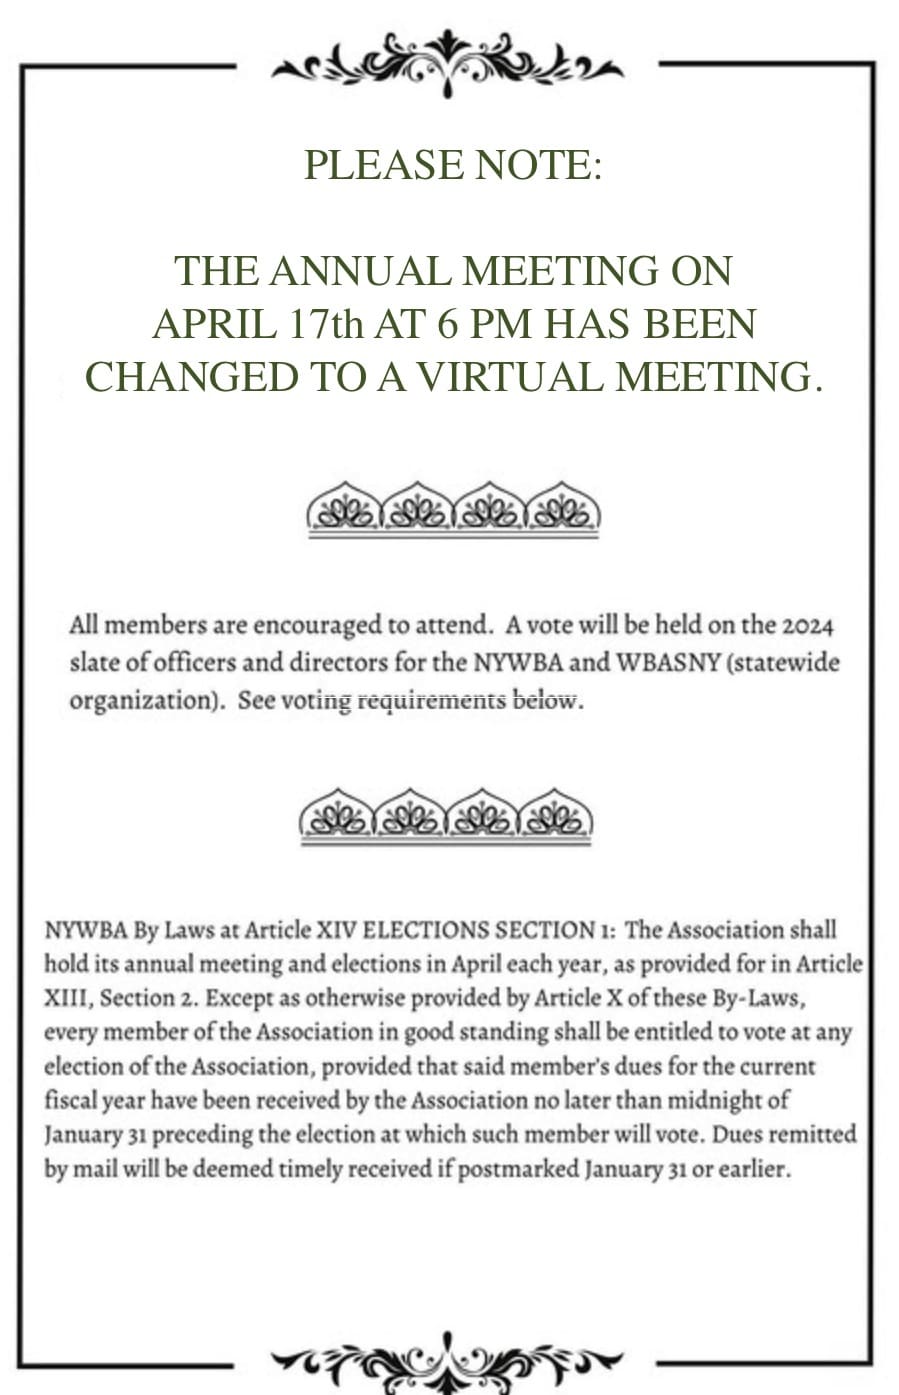 The annual meeting on April 17th at 6pm has been changed to a virtual meeting.